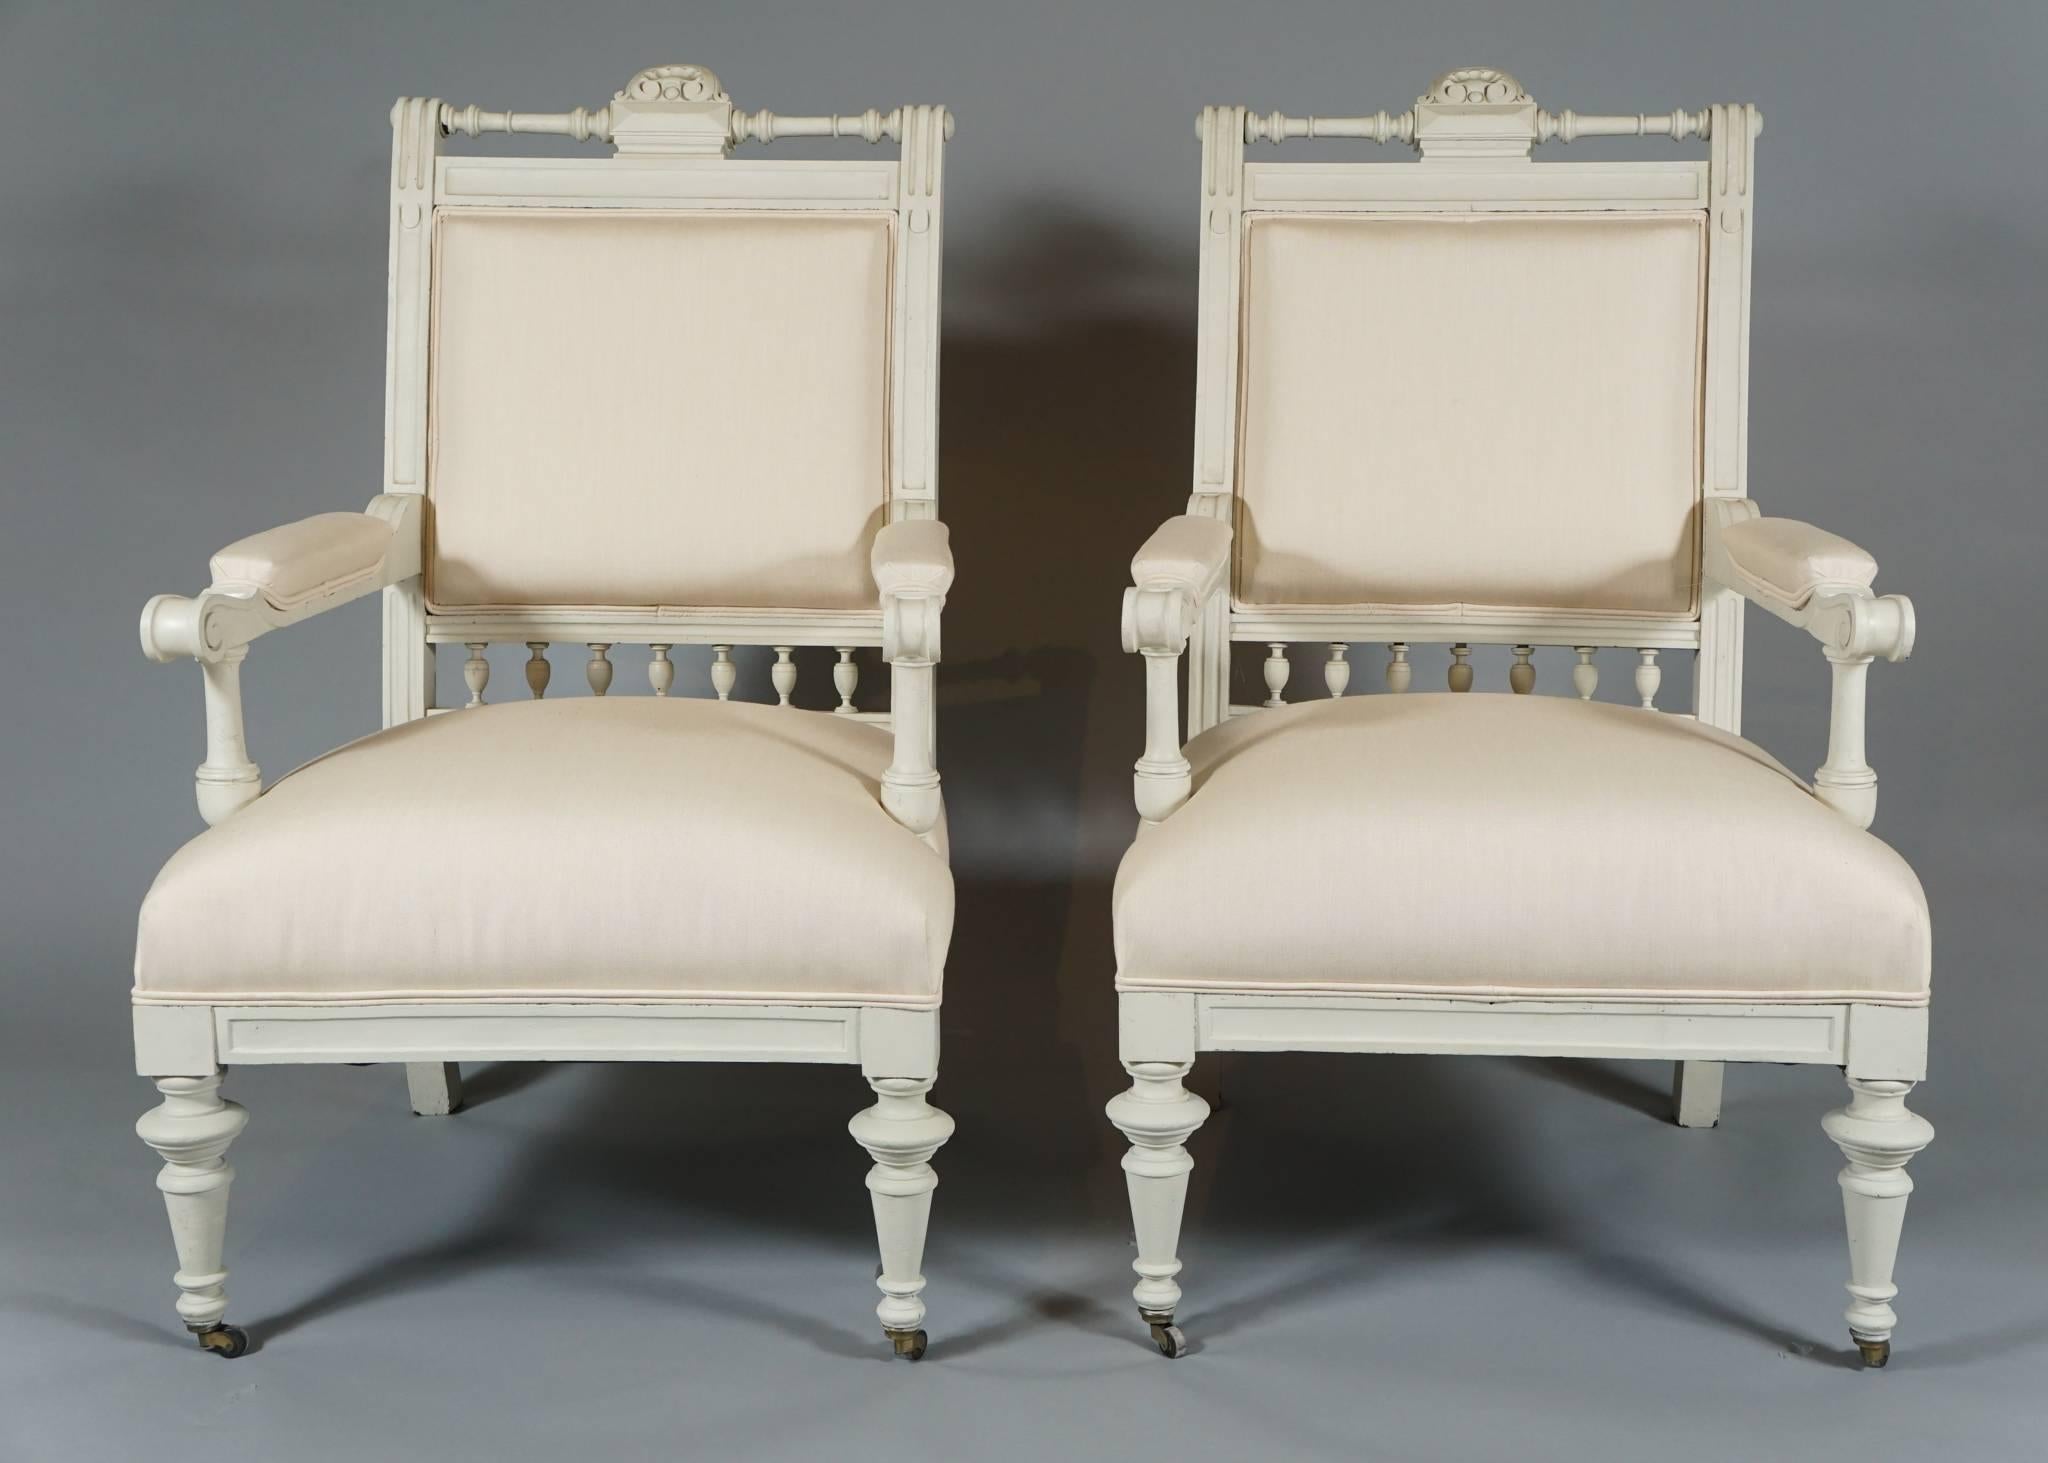 Handsome pair of armchairs from the Aesthetic Movement, circa 1880s, in
white-painted wood with turned legs and spindle decoration reupholstered in white linen/cotton, front legs on castors.